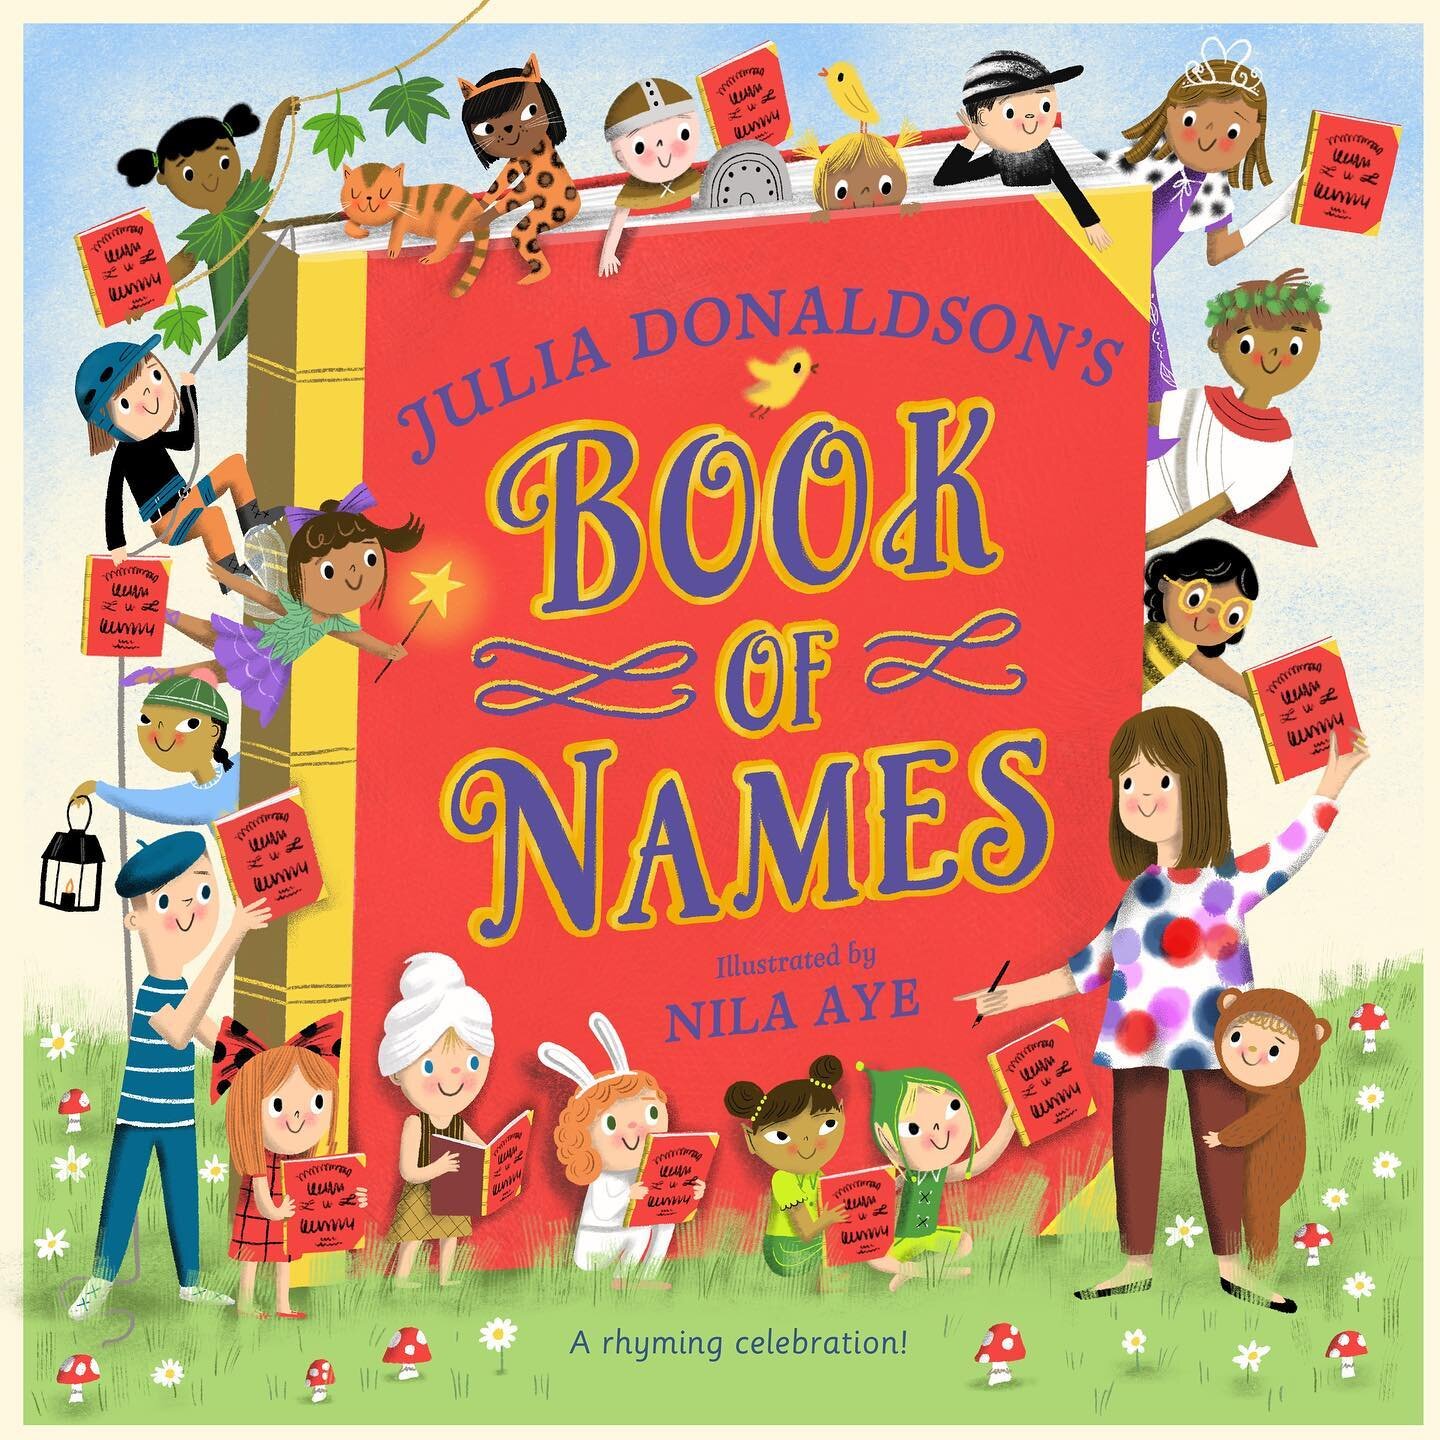 Drumroll 🥁 please. I&rsquo;d like to reveal the cover to my next illustrated book written by the wonderfully talented Julia Donaldson. 
A special poem celebrating all the children who have bought her books. It&rsquo;s published by @macmillankidsuk a